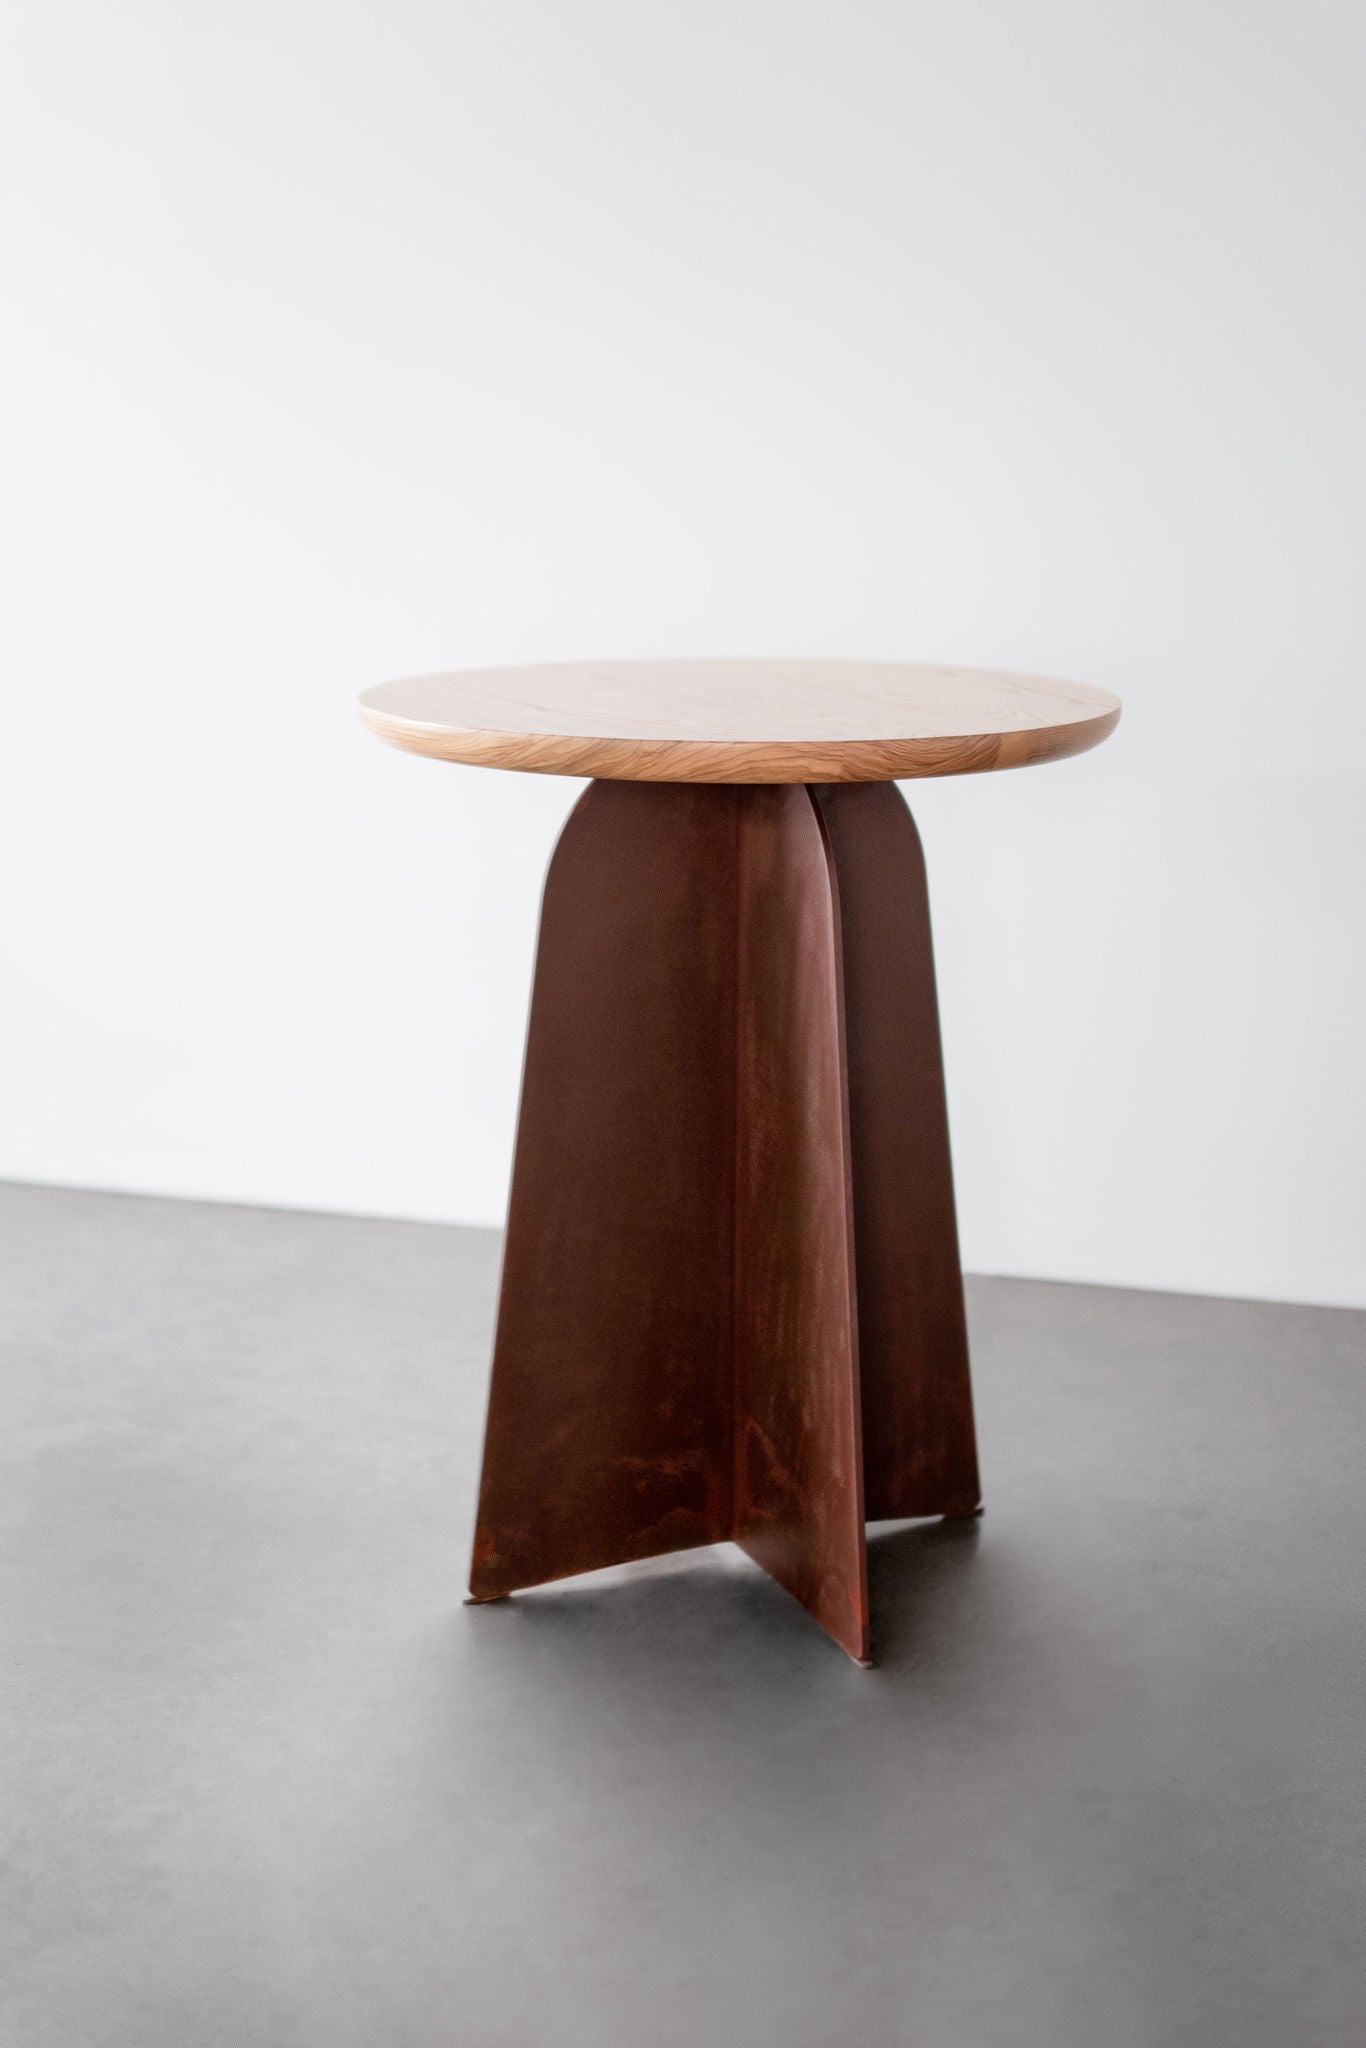 Tula entry table- steel legs with wood top